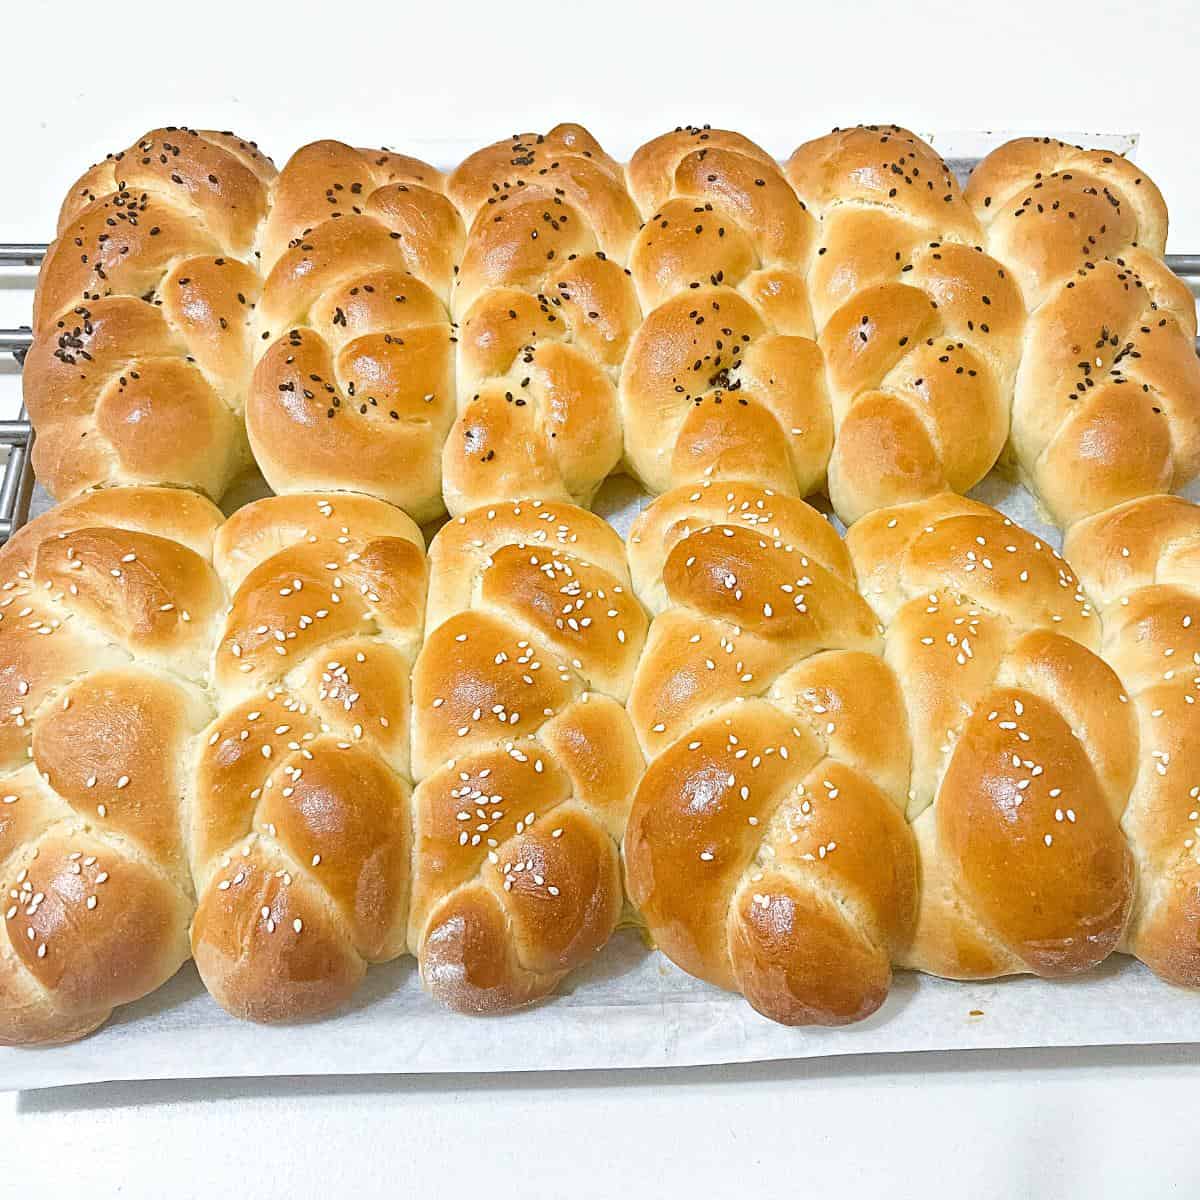 12 challah braided rolls on the table.